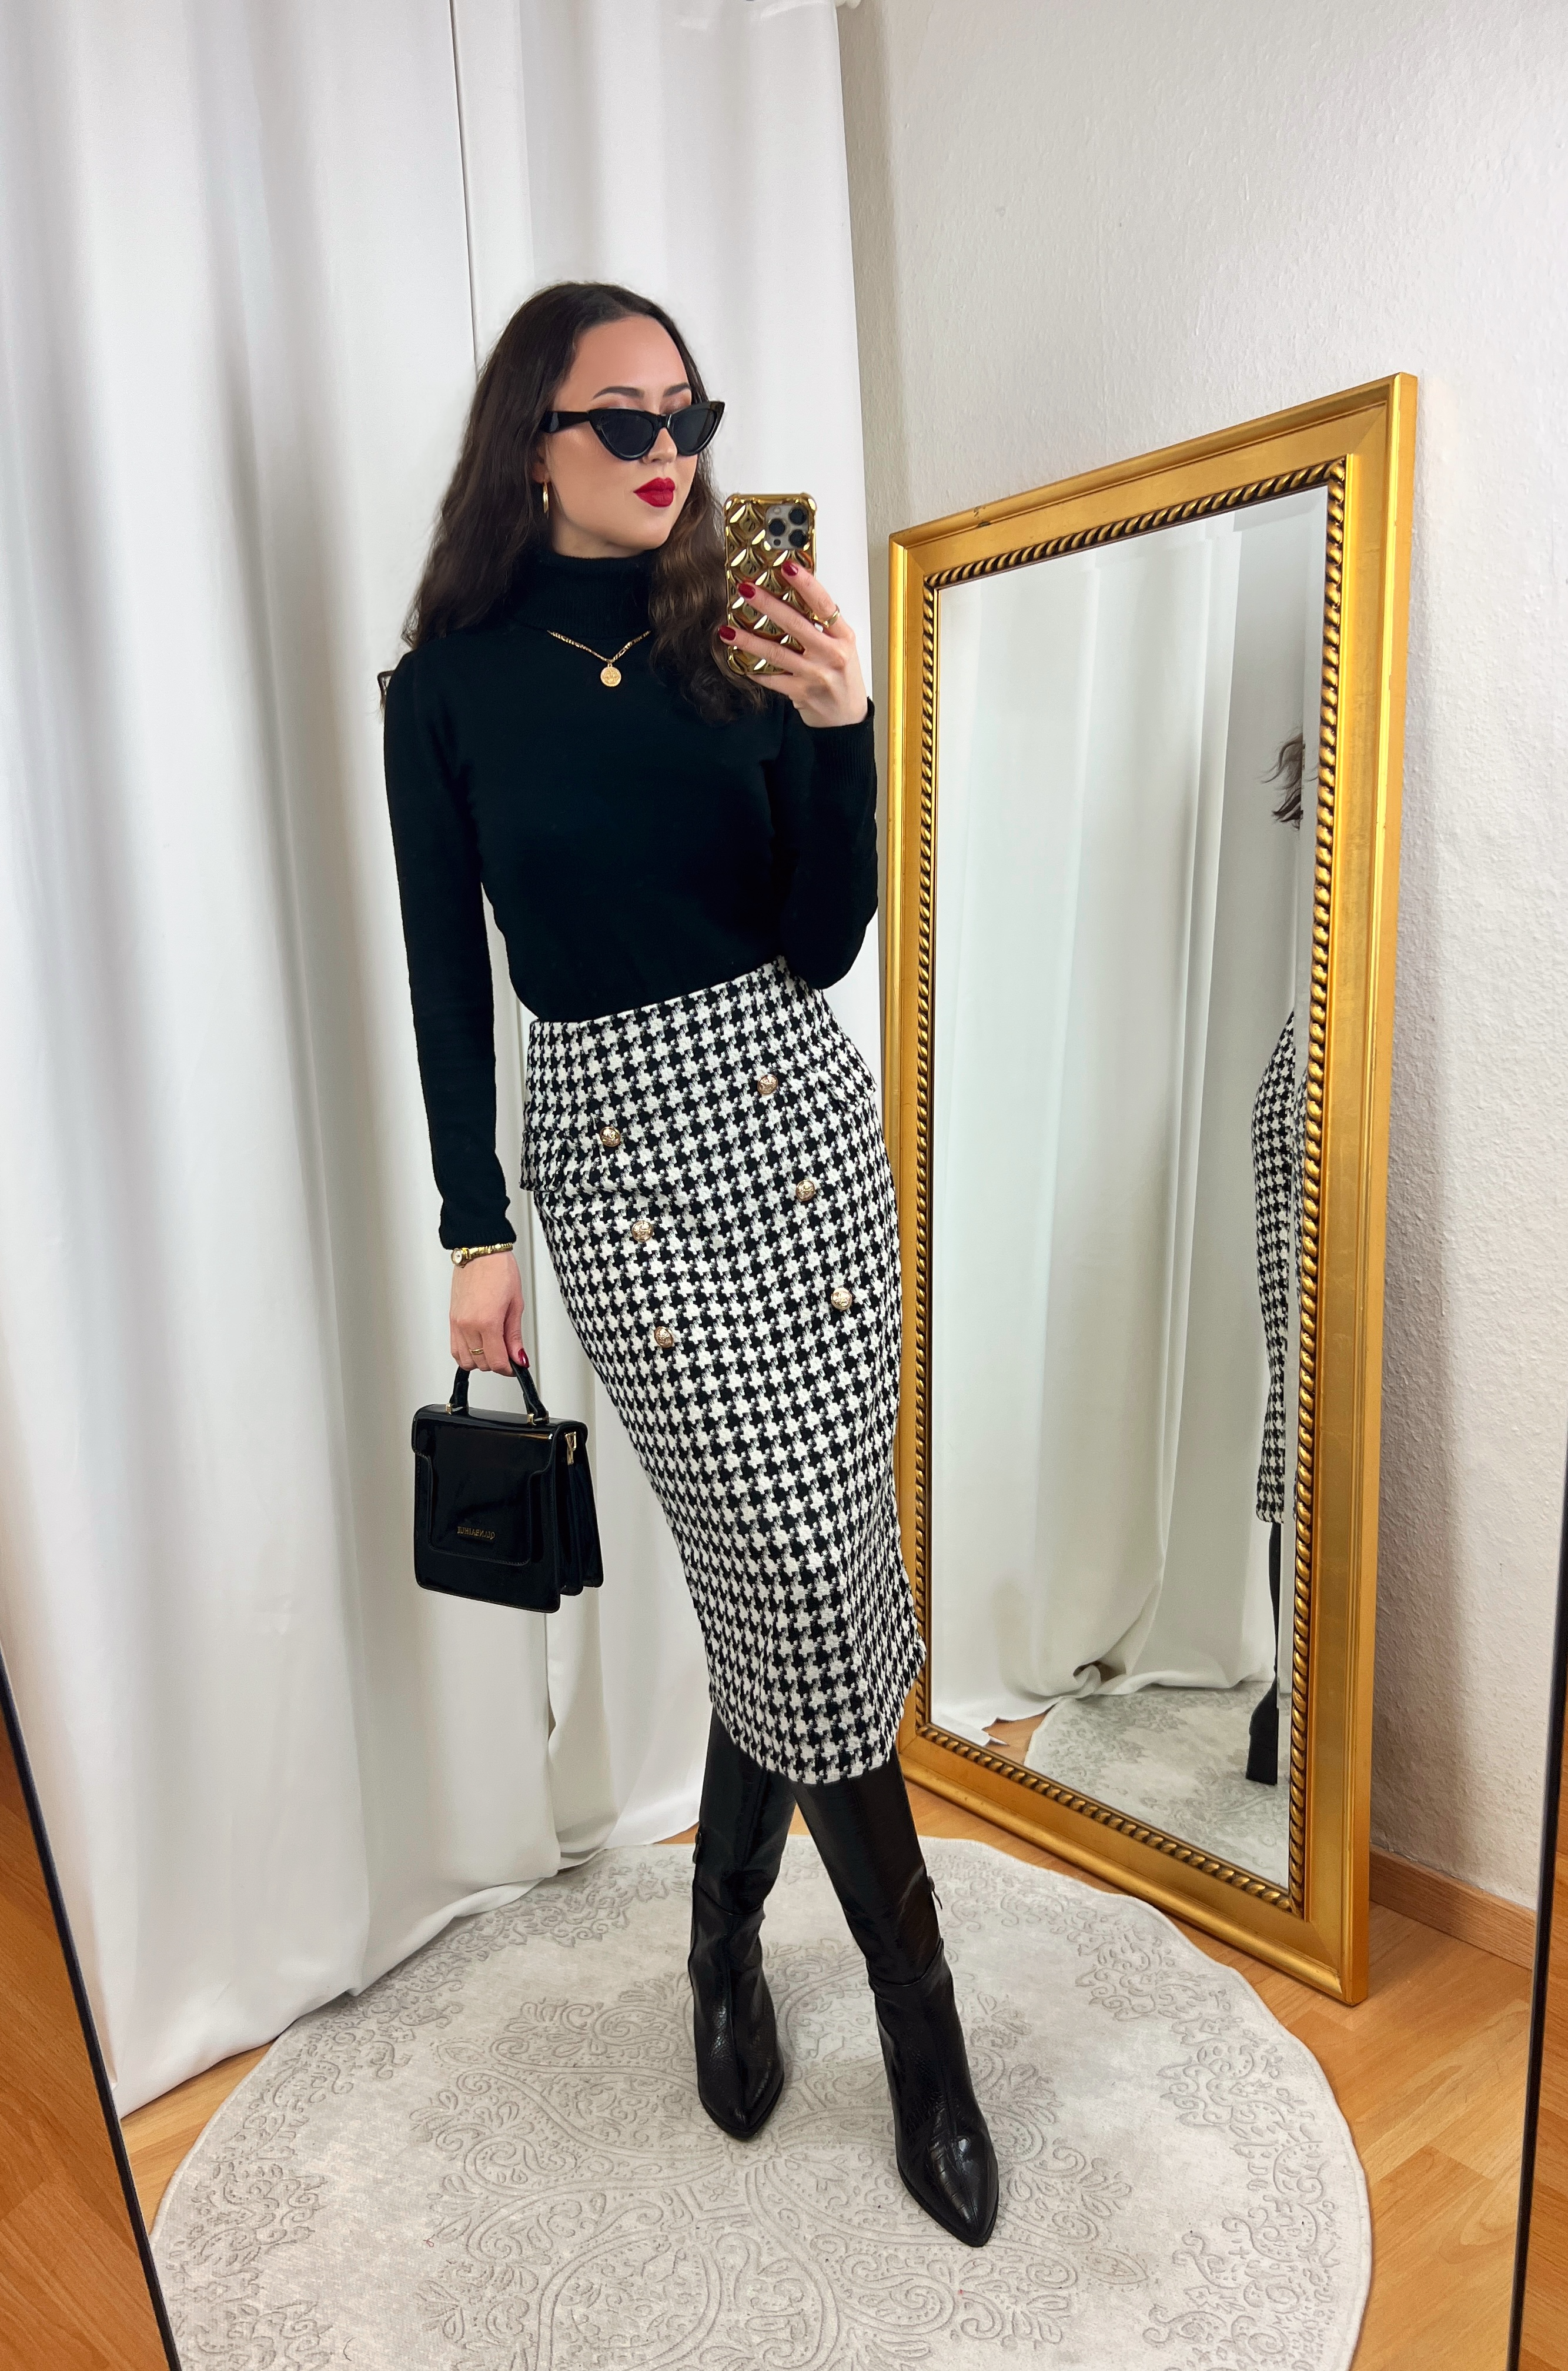 Houndstooth Pencil Skirt and Black Turtleneck Outfit